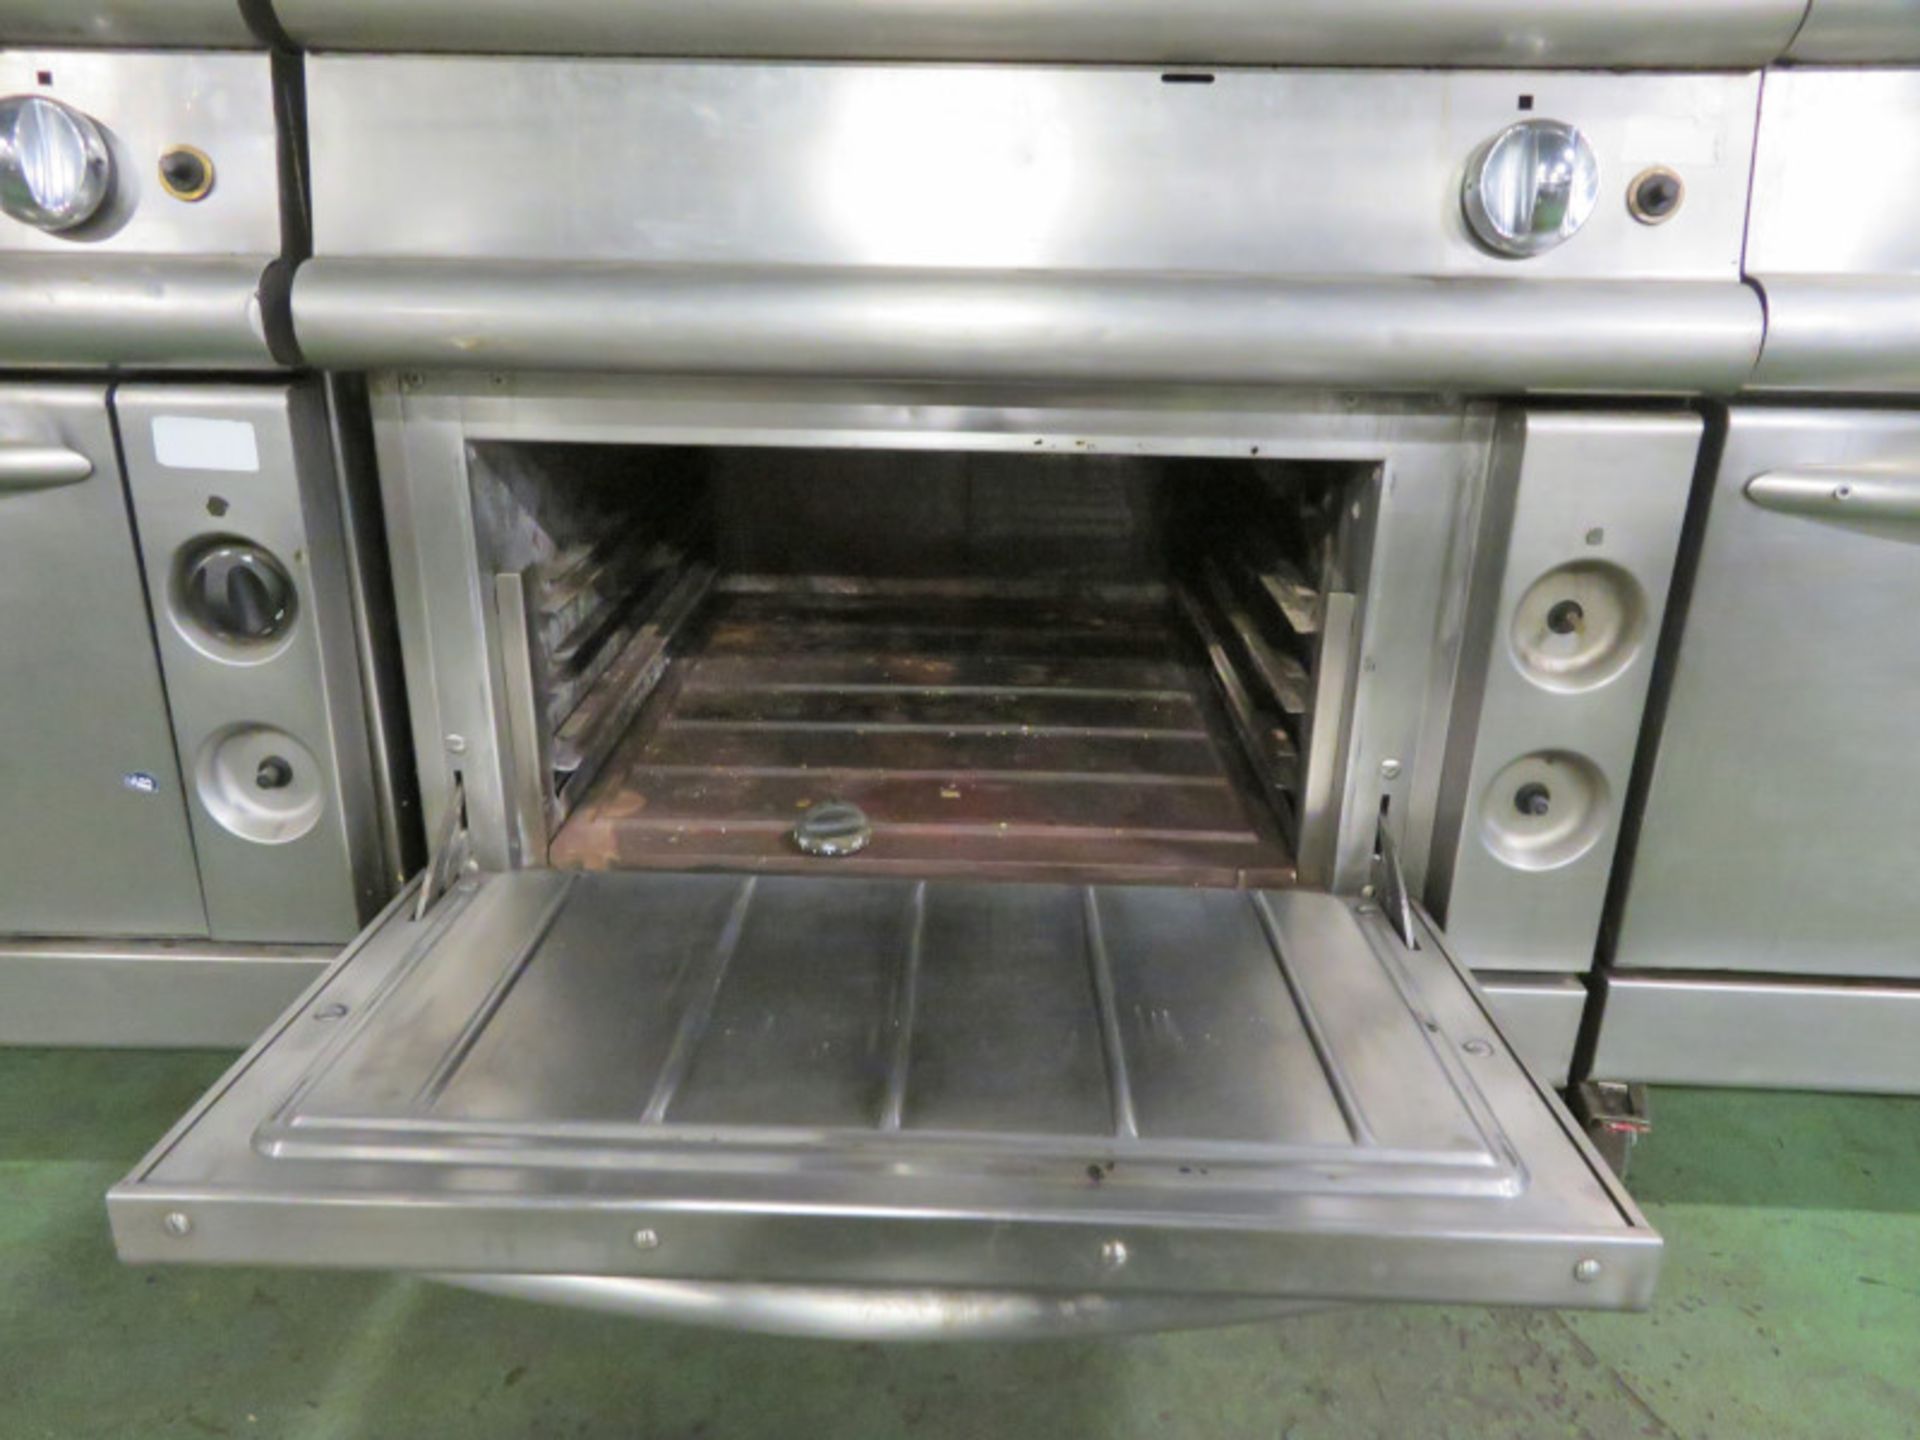 Gas Flat Top Stove And Oven L 930mm x W 800mm x H 900mm - Image 4 of 4